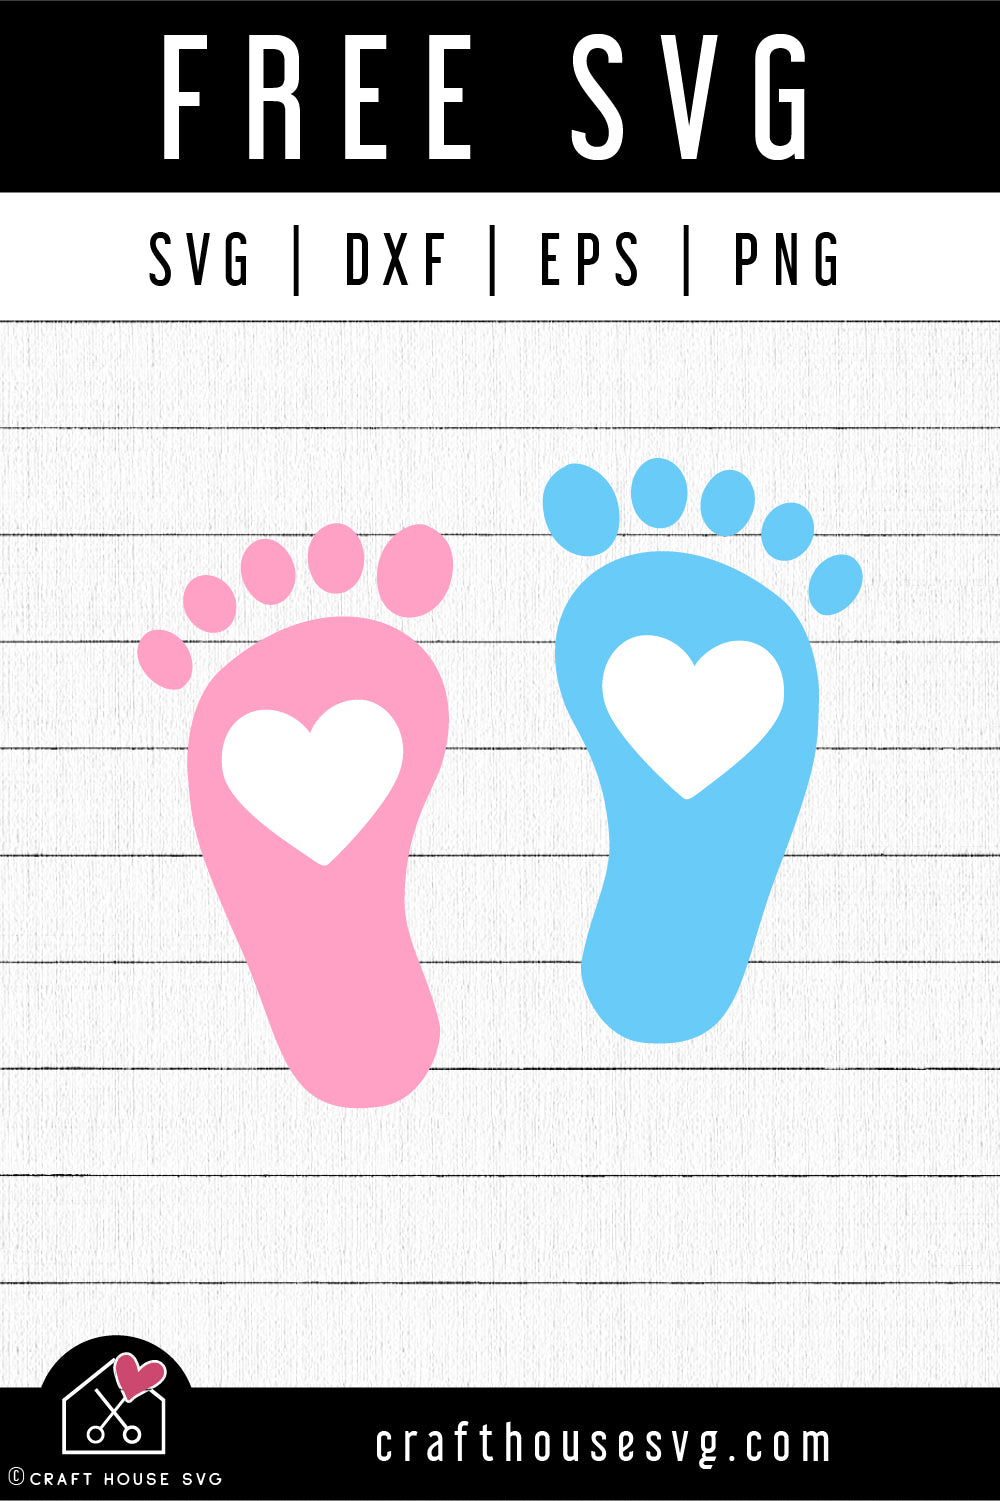 Download Free Baby Footprint Svg Cut File Craft House Svg